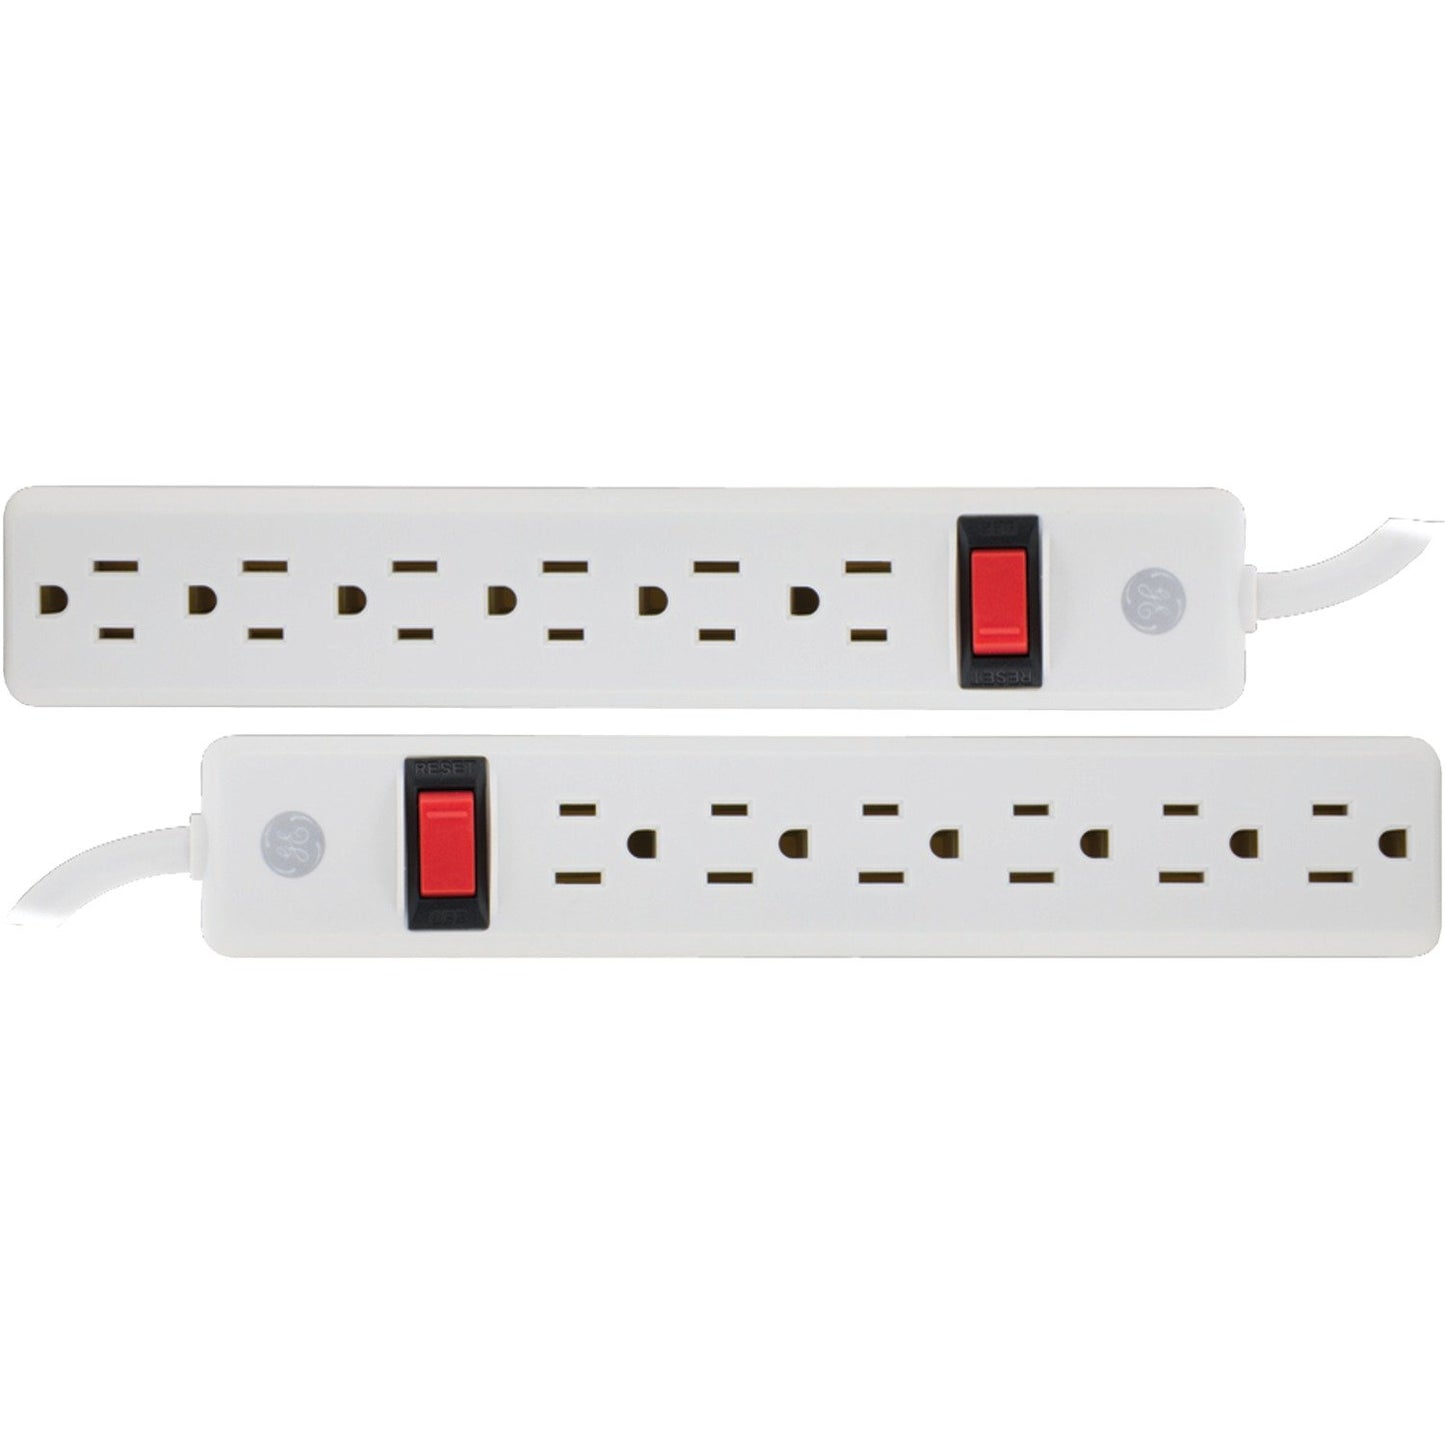 GE 14087 6-Outlet Power Strip